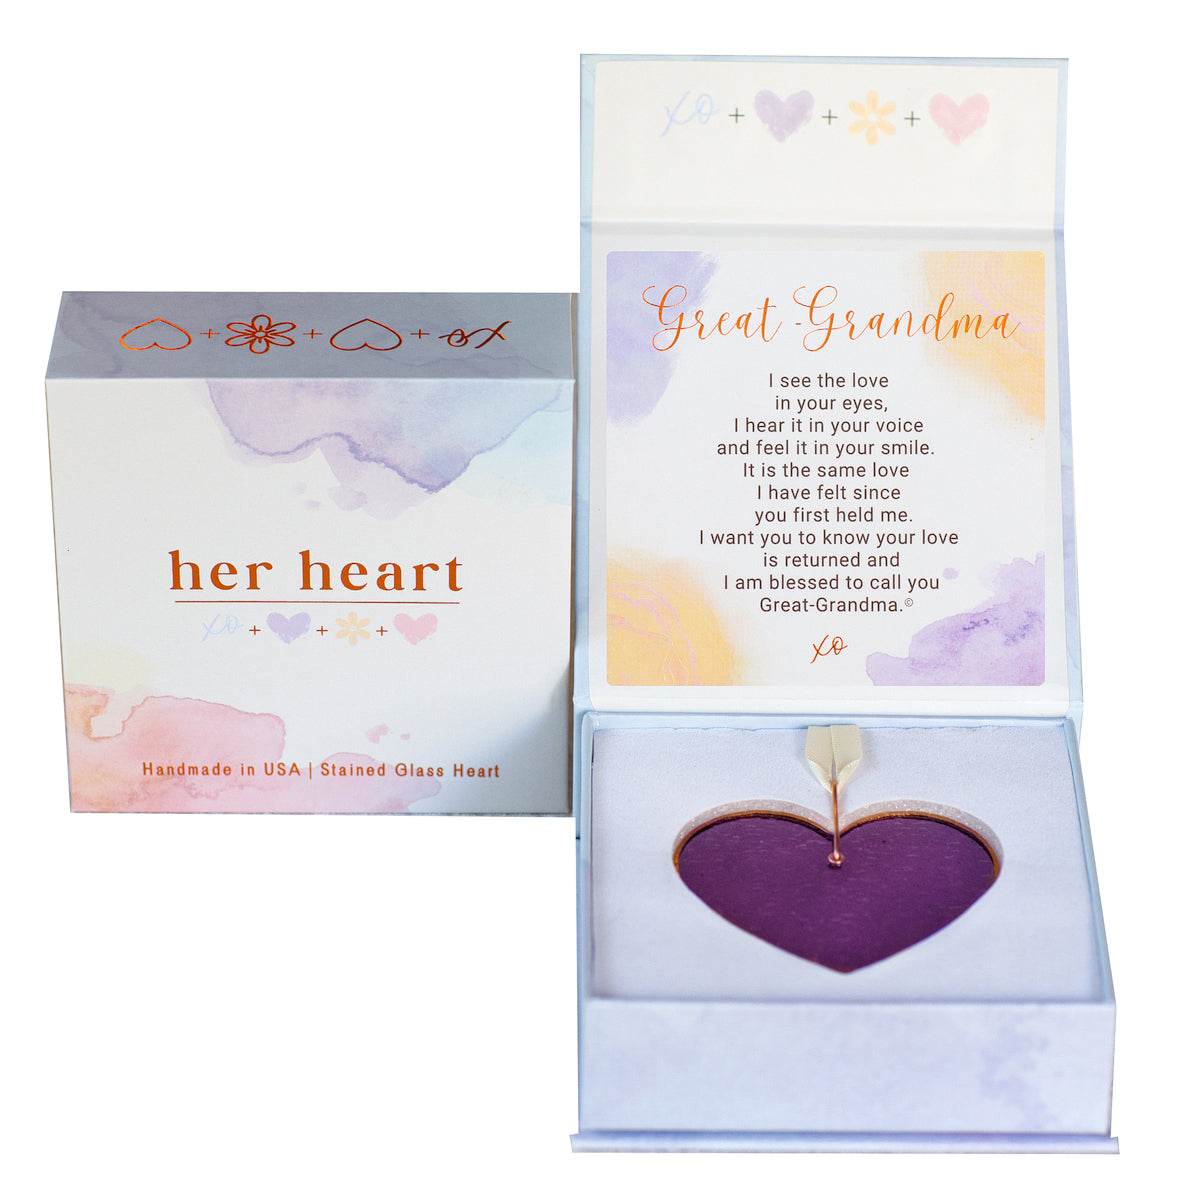 Her Heart for Great-Grandma gift box shown closed and open.  Open box features sentiment card and heart resting in foam cushion.